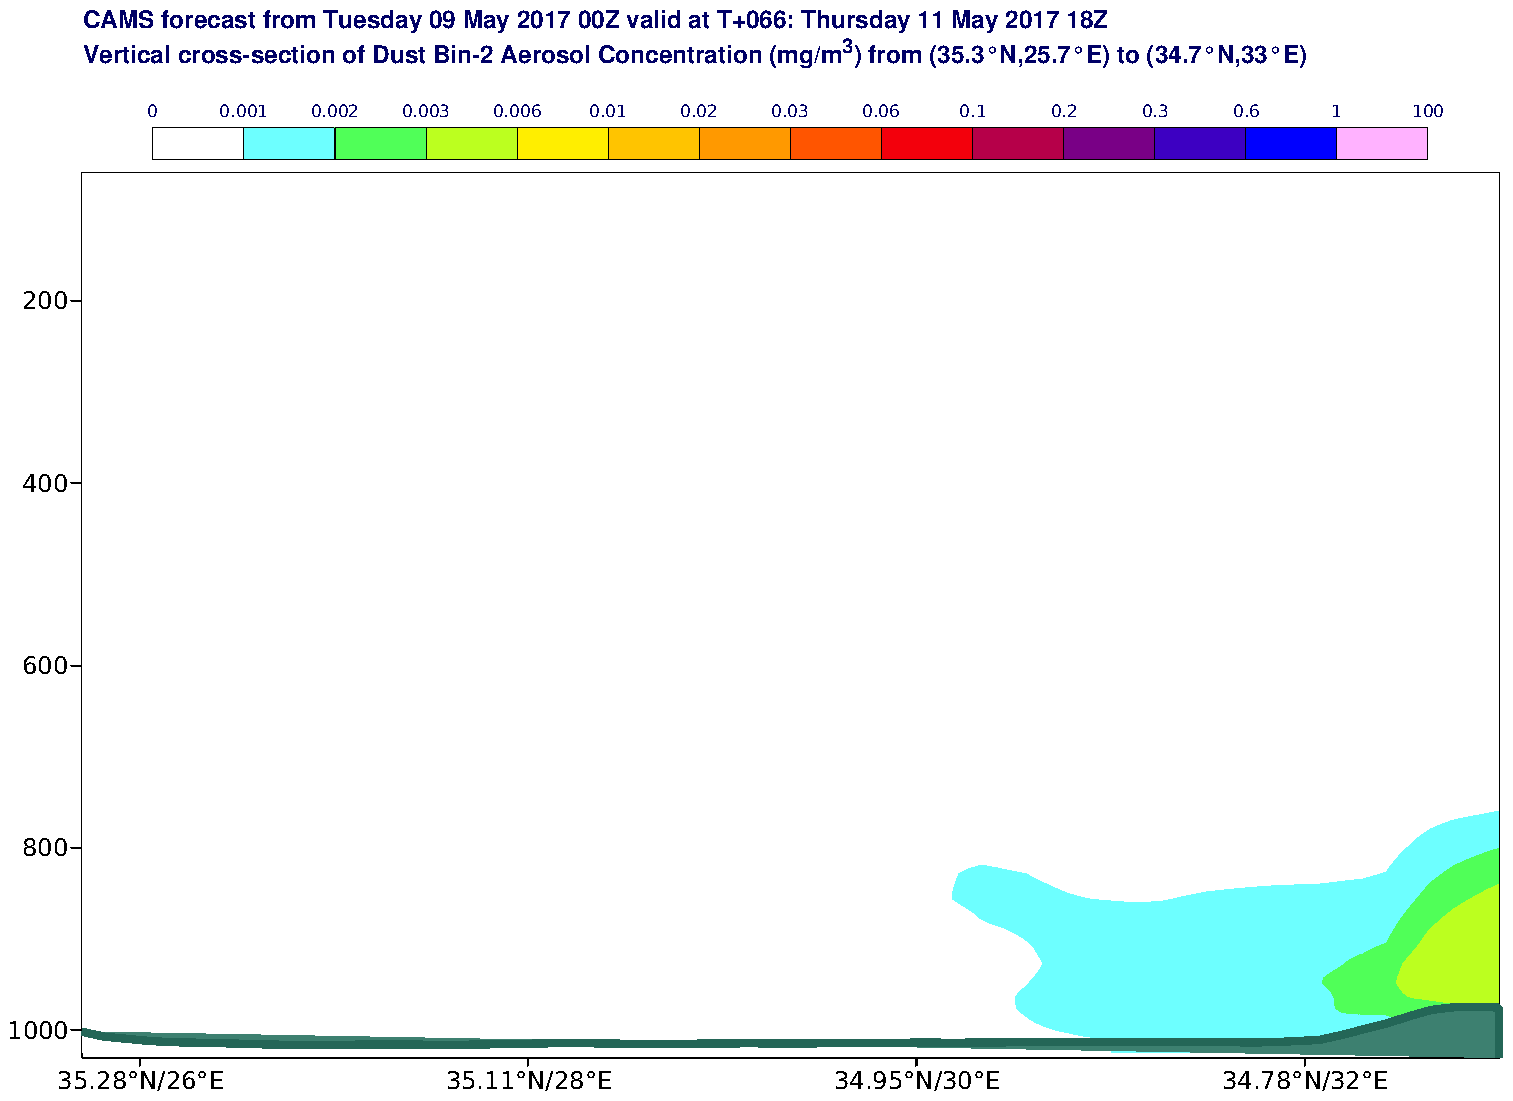 Vertical cross-section of Dust Bin-2 Aerosol Concentration (mg/m3) valid at T66 - 2017-05-11 18:00